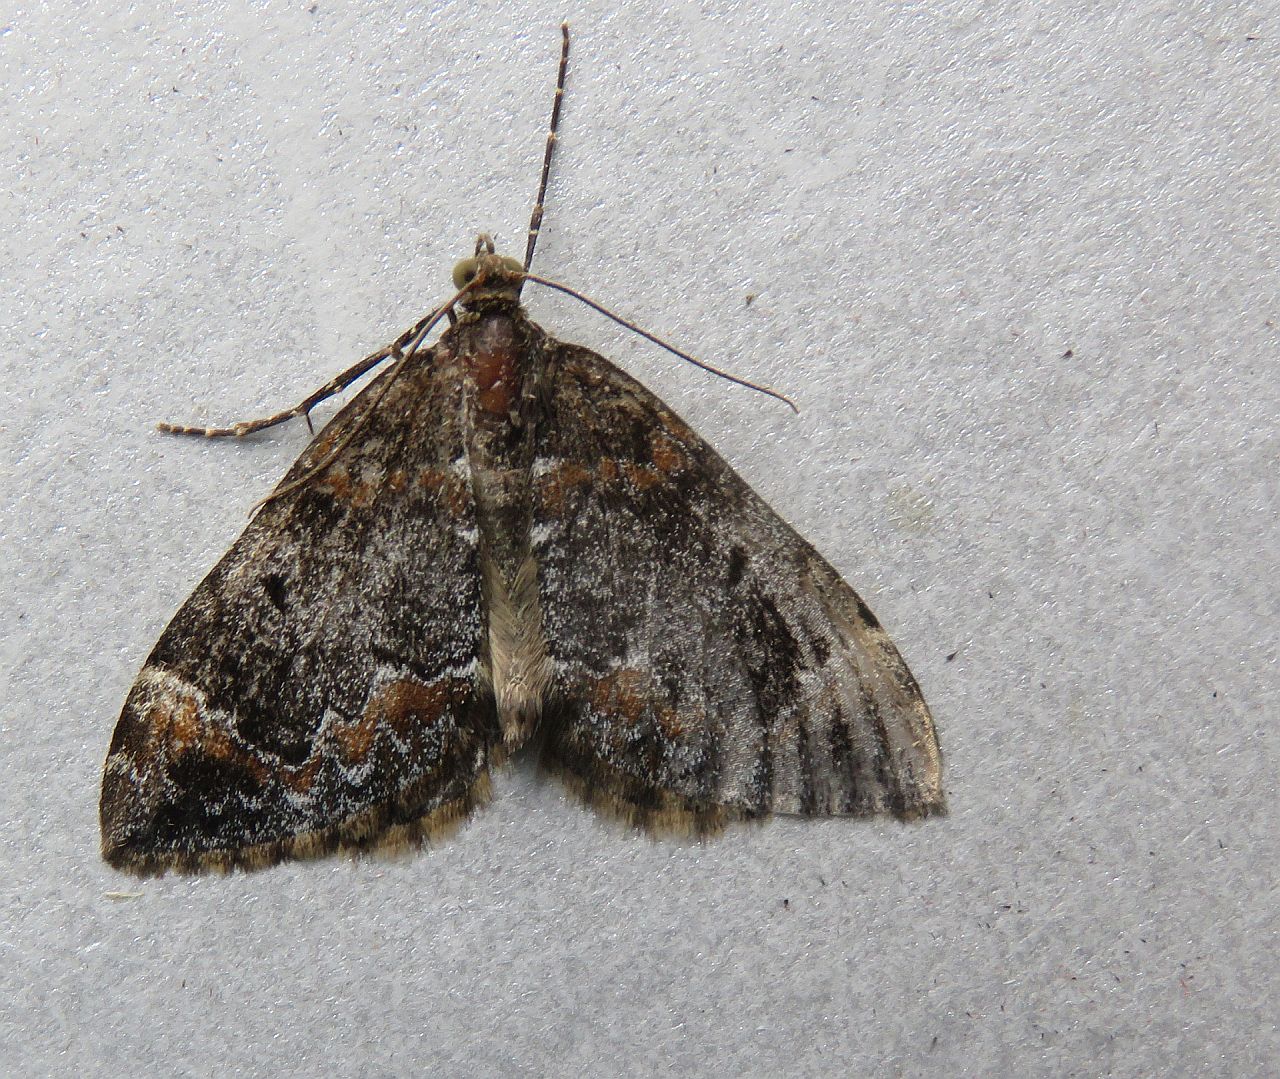  Common Marbled Carpet 